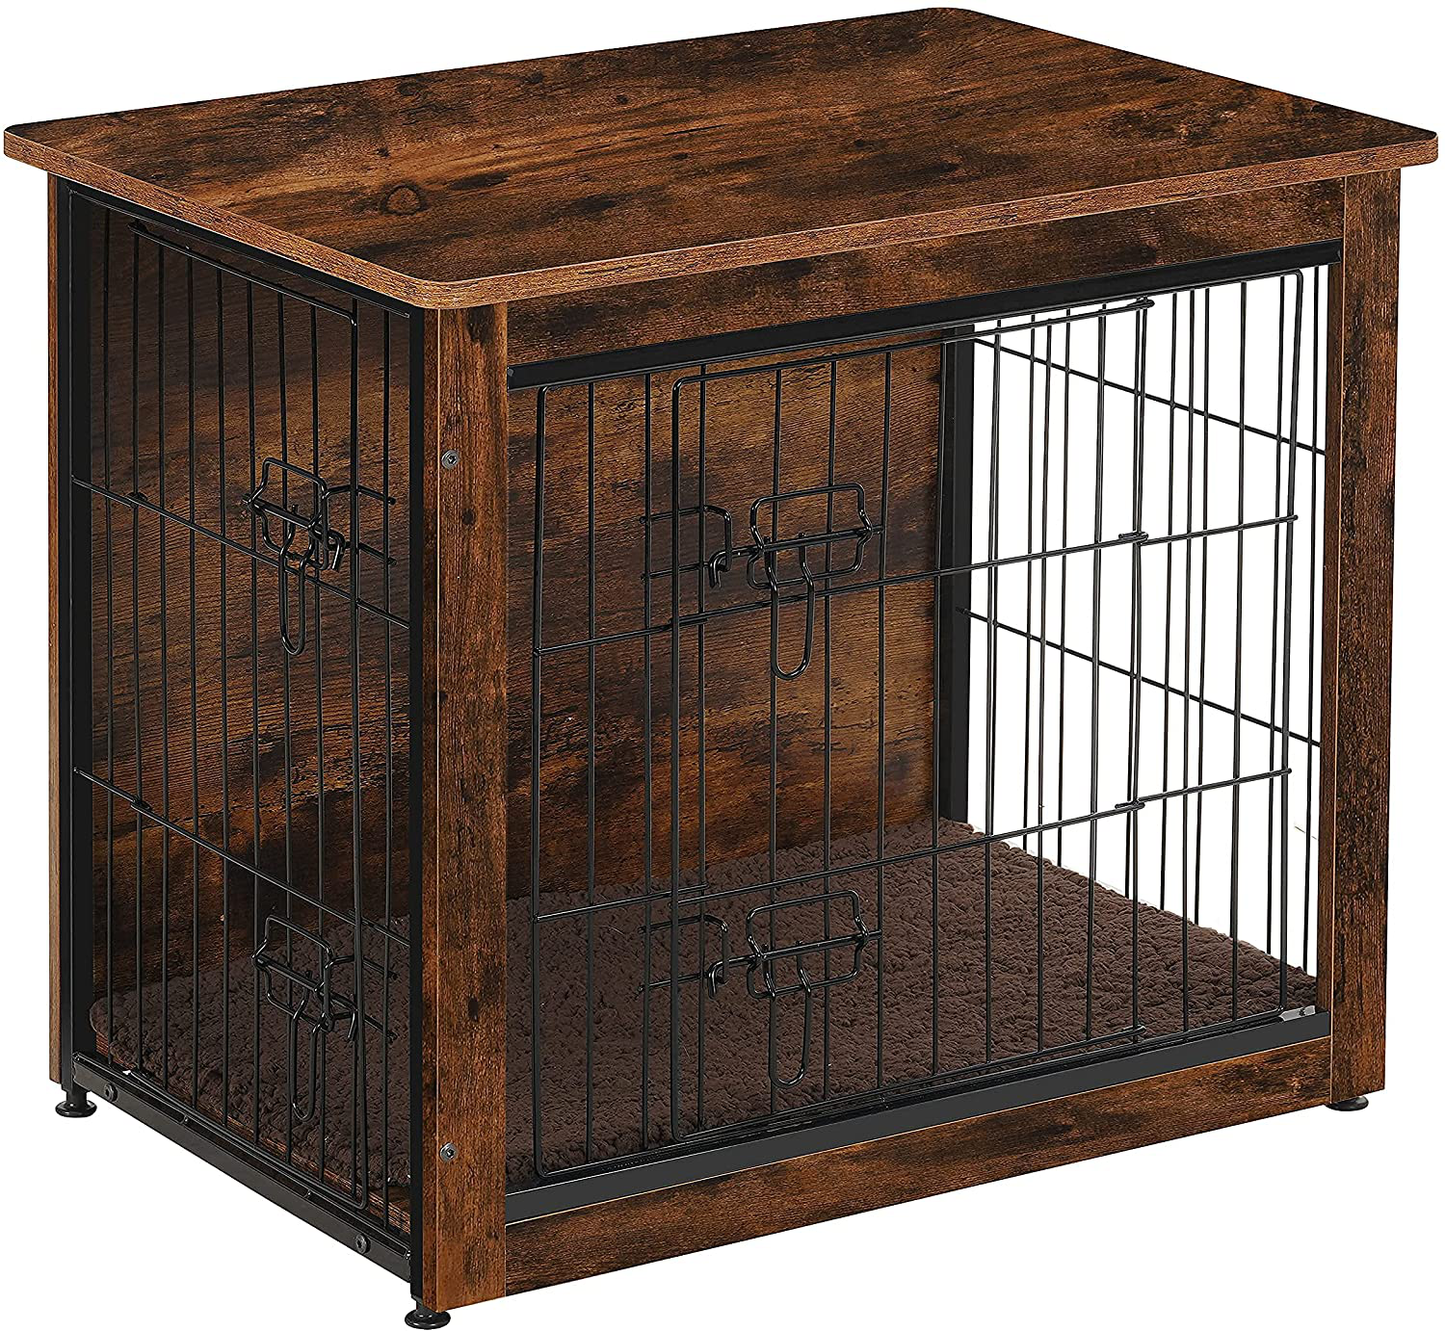 DWANTON Dog Crate Furniture, Wooden Pet Crate End Table, Indoor Dog Kennel for Small/Medium/Large Dog Animals & Pet Supplies > Pet Supplies > Dog Supplies > Dog Kennels & Runs Dwanton 27.2" L x 20.1" W x 23.6" H  